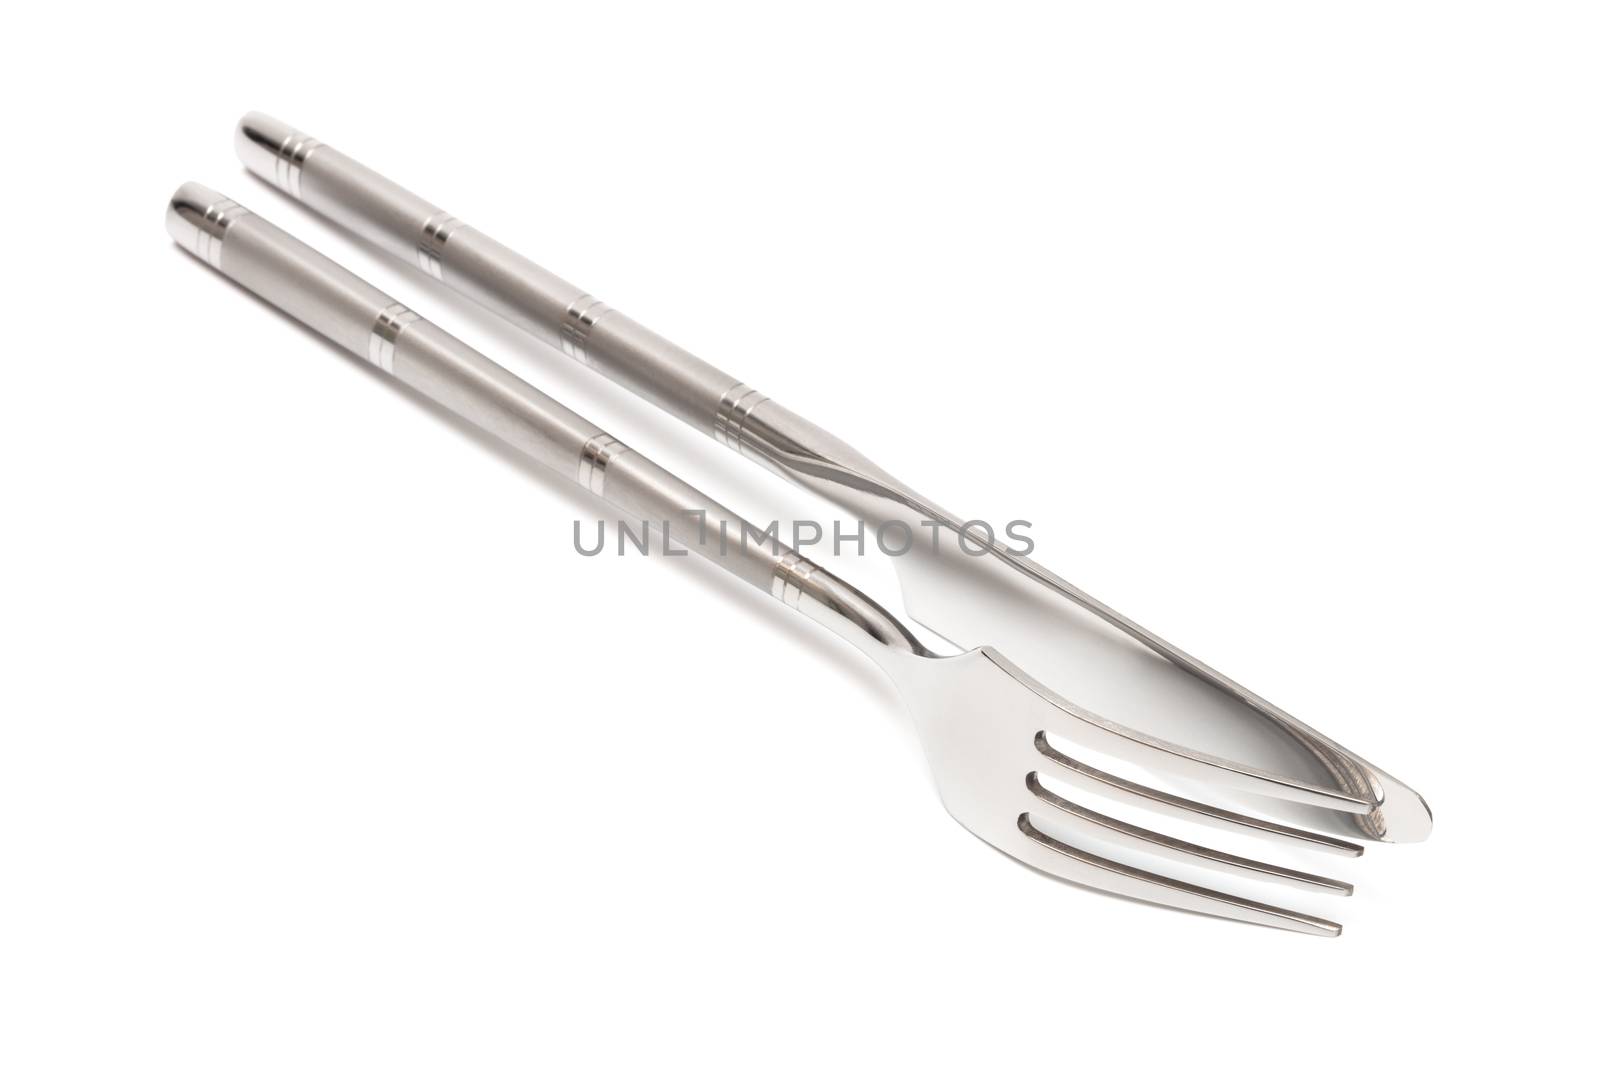 steel knife and fork on a white background